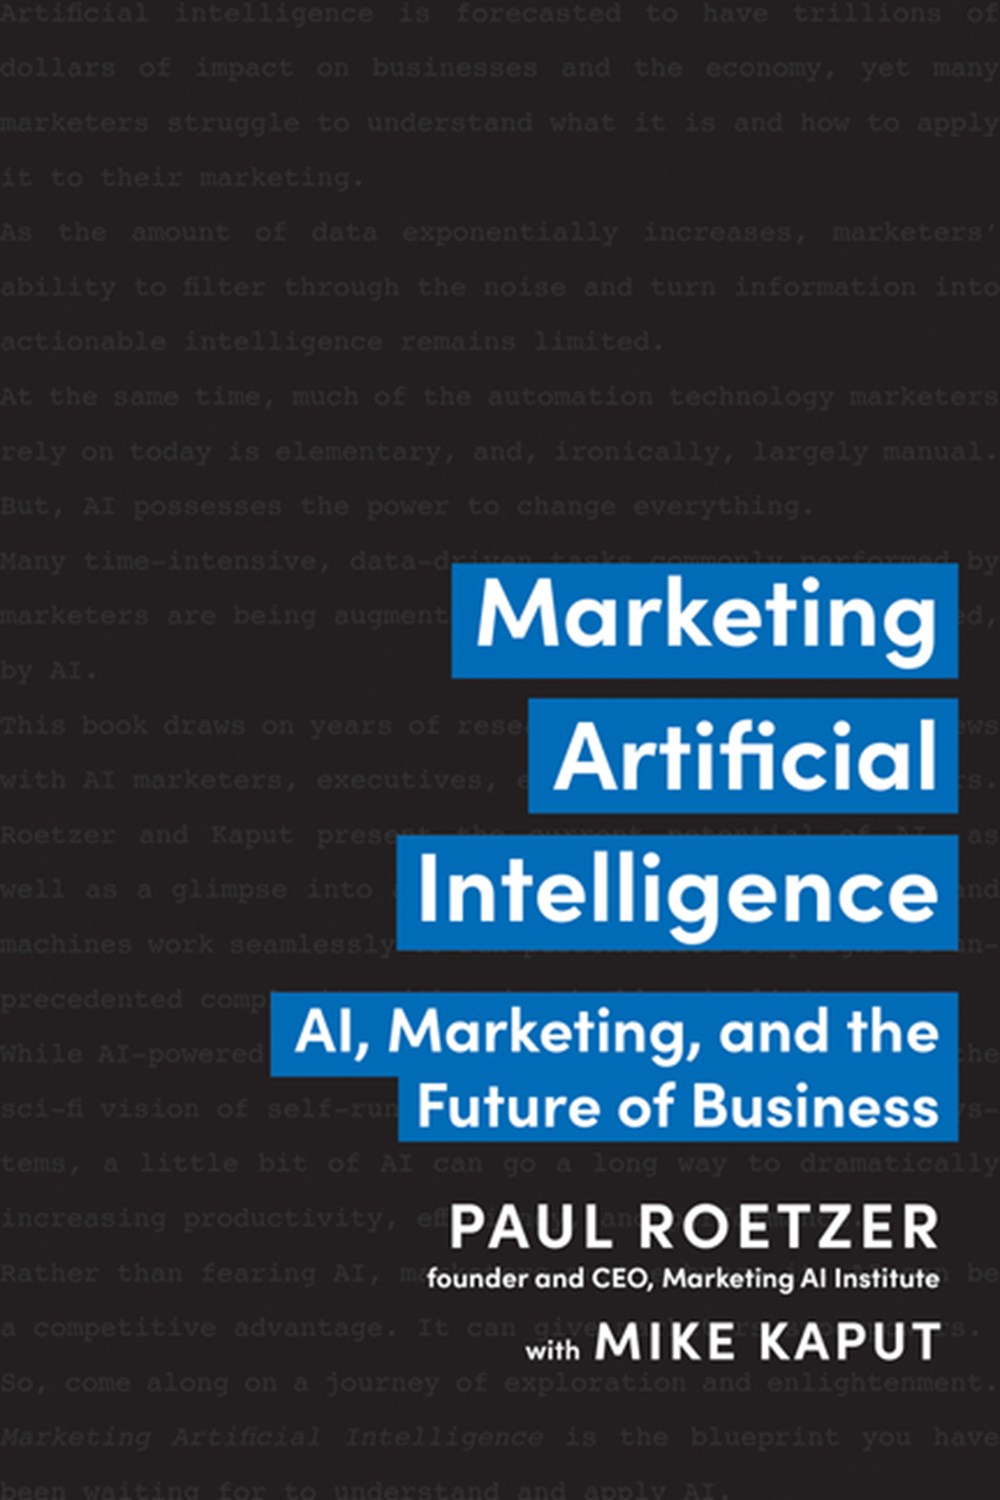 Marketing Artificial Intelligence Ai, Marketing, and the Future of Business